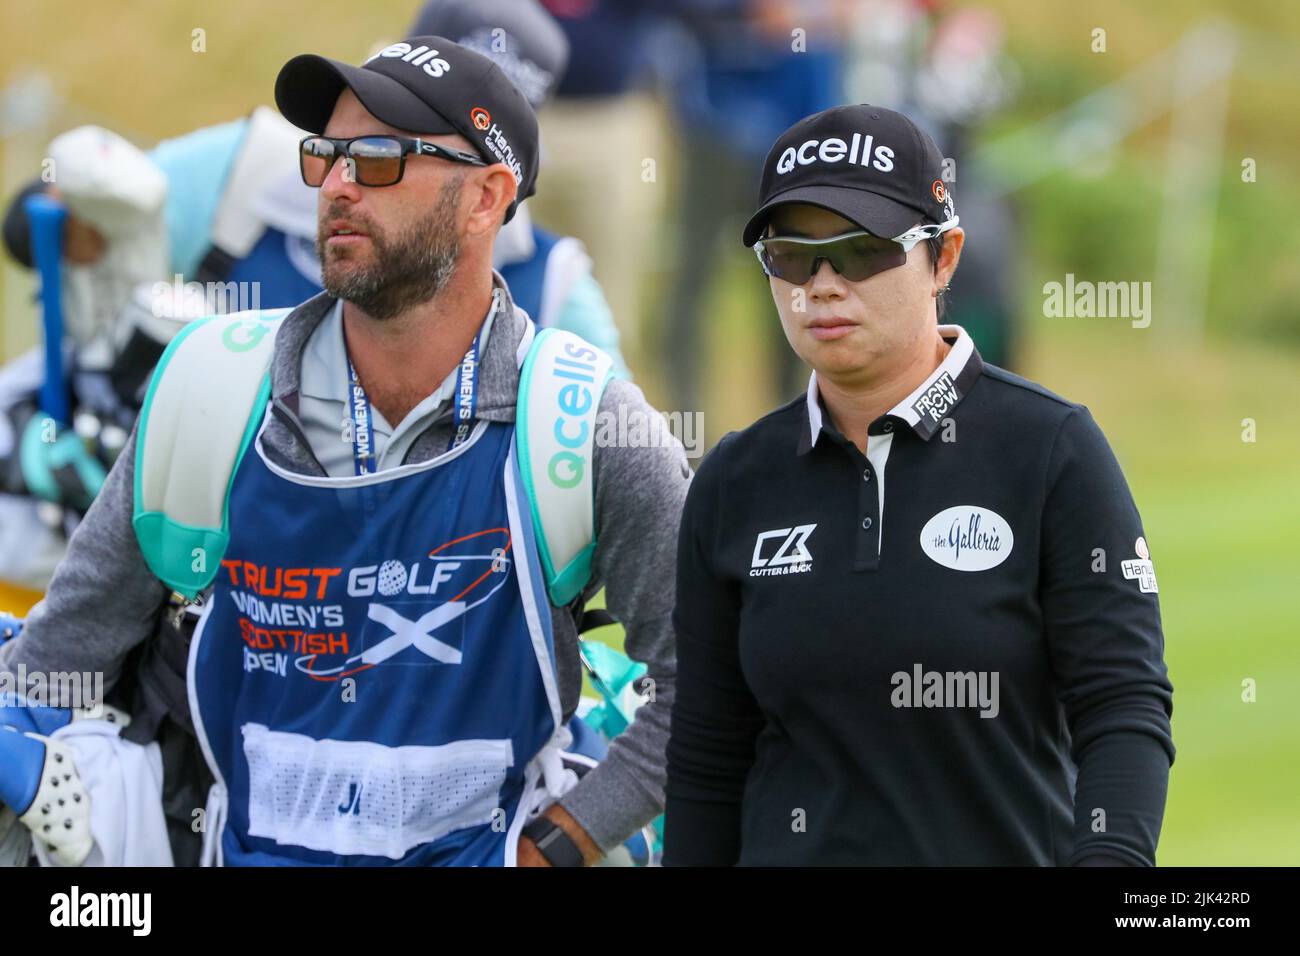 Irvine, UK. 30th July, 2022. The third round of the Trust Golf Women's Scottish Golf took place with 75 players making the cut. Heavy overnight rain from Friday into Saturday made for a softer and more testing course. Eun-Hee Ji with caddie. Credit: Findlay/Alamy Live News Stock Photo